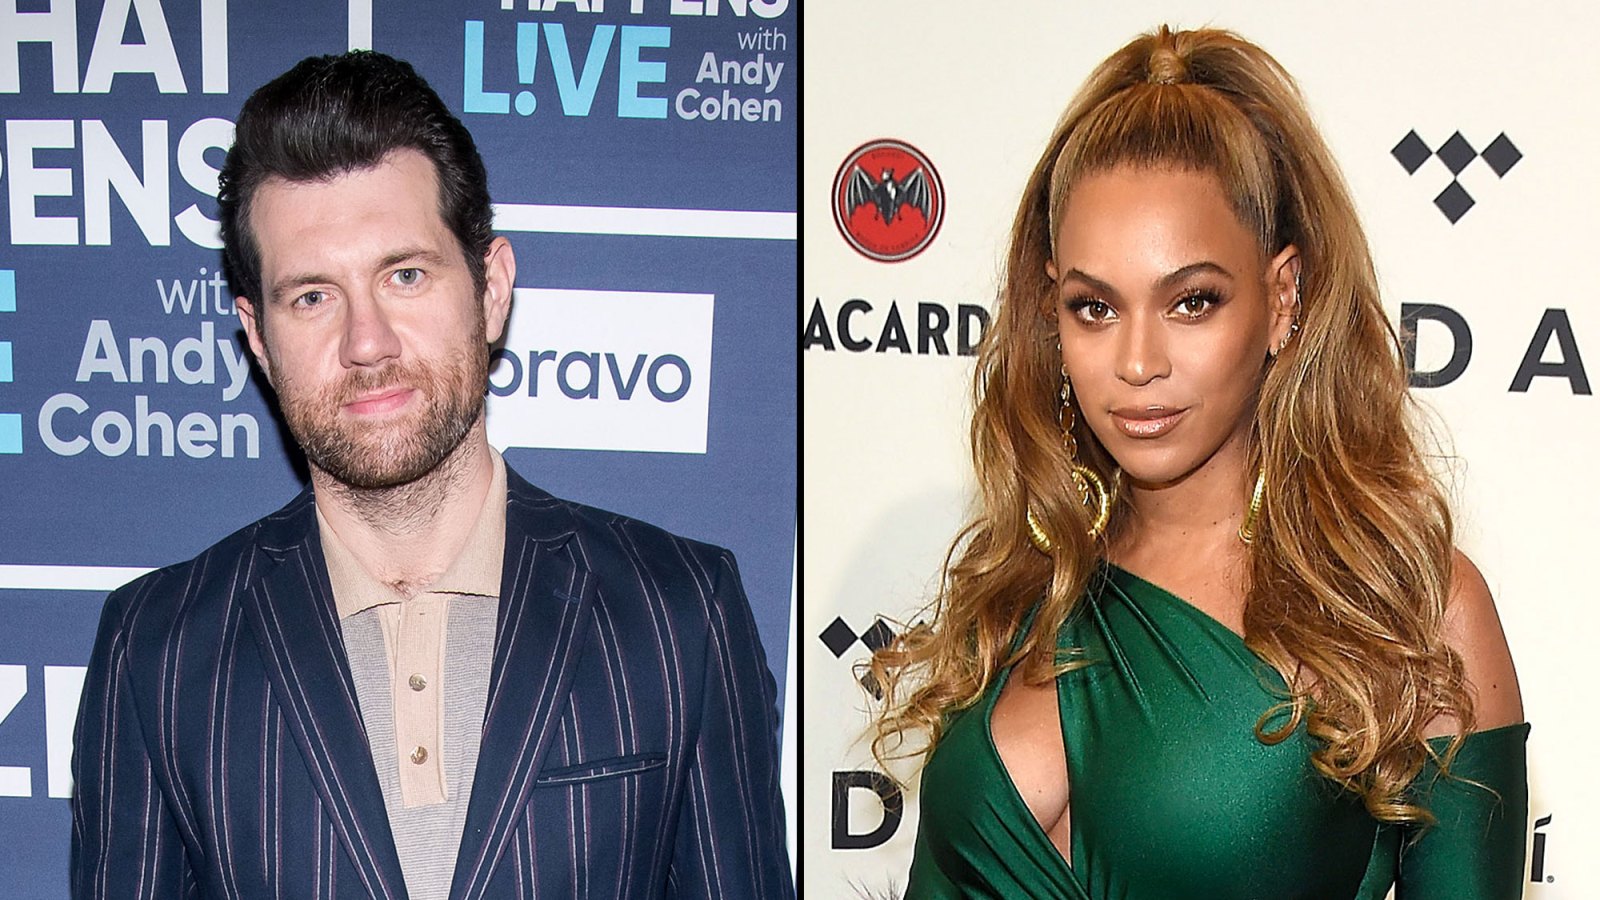 Billy Eichner Doesn’t Mind That He ‘Had No Direct Contact’ With Beyonce While Making ‘The Lion King’